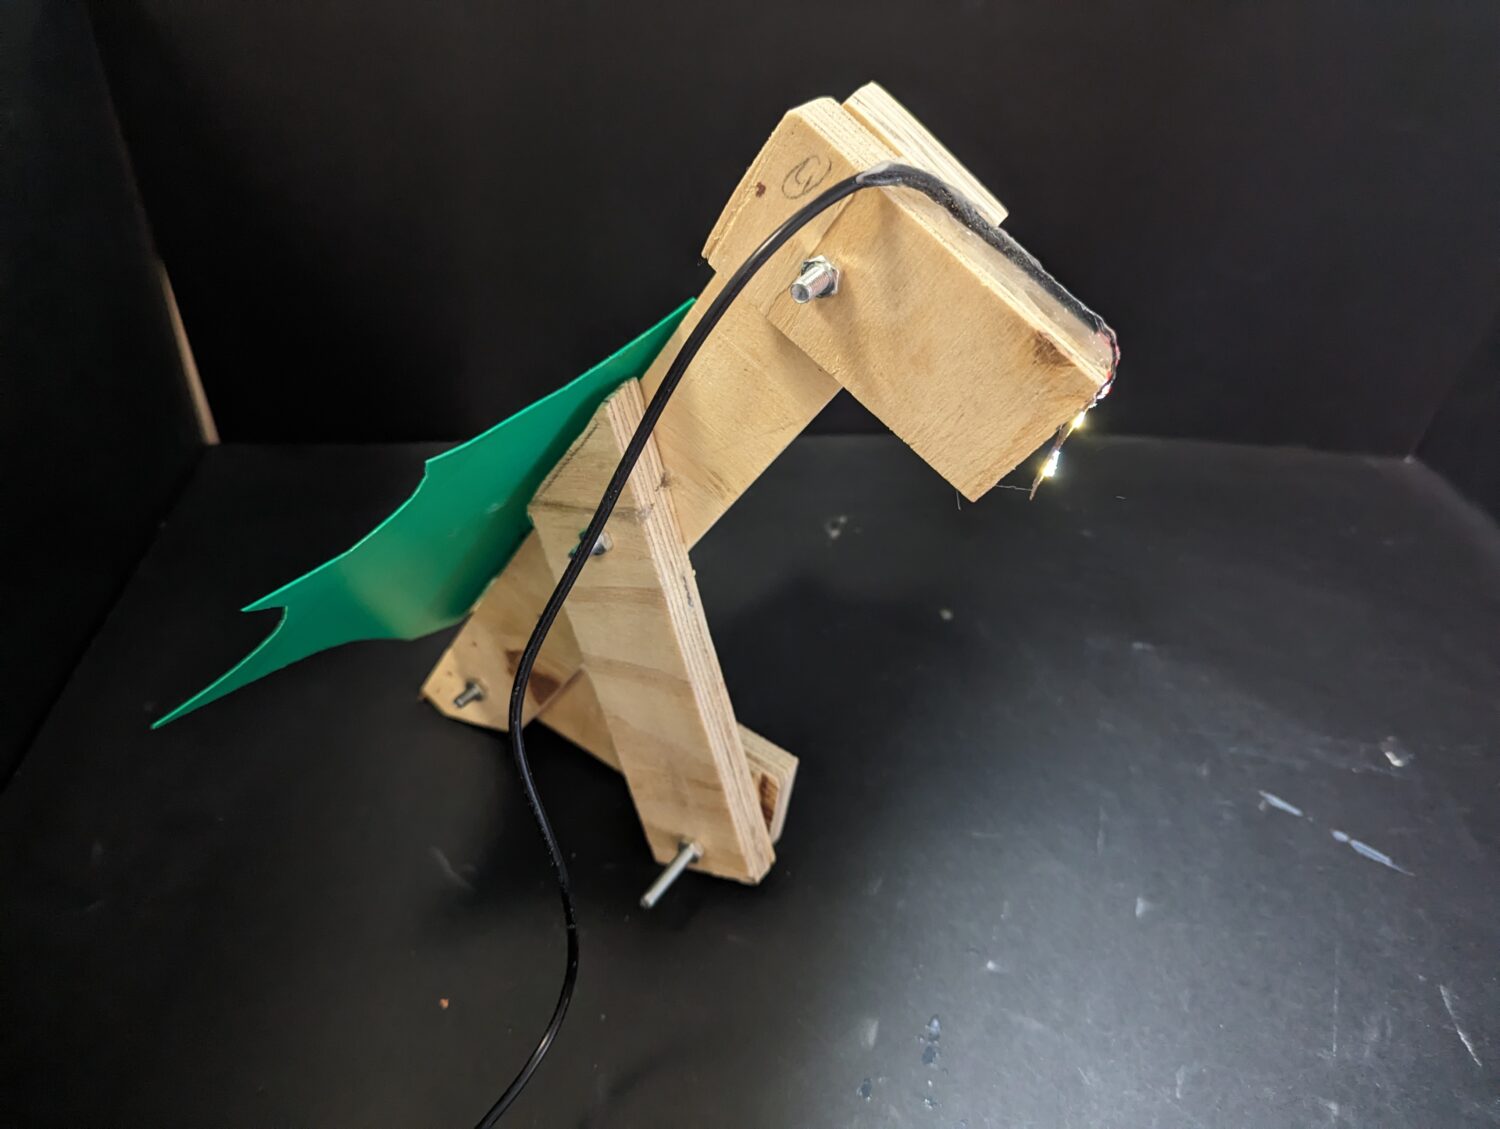 Dinosaur Shaped Zoomorphic Lamp by Year 9 student